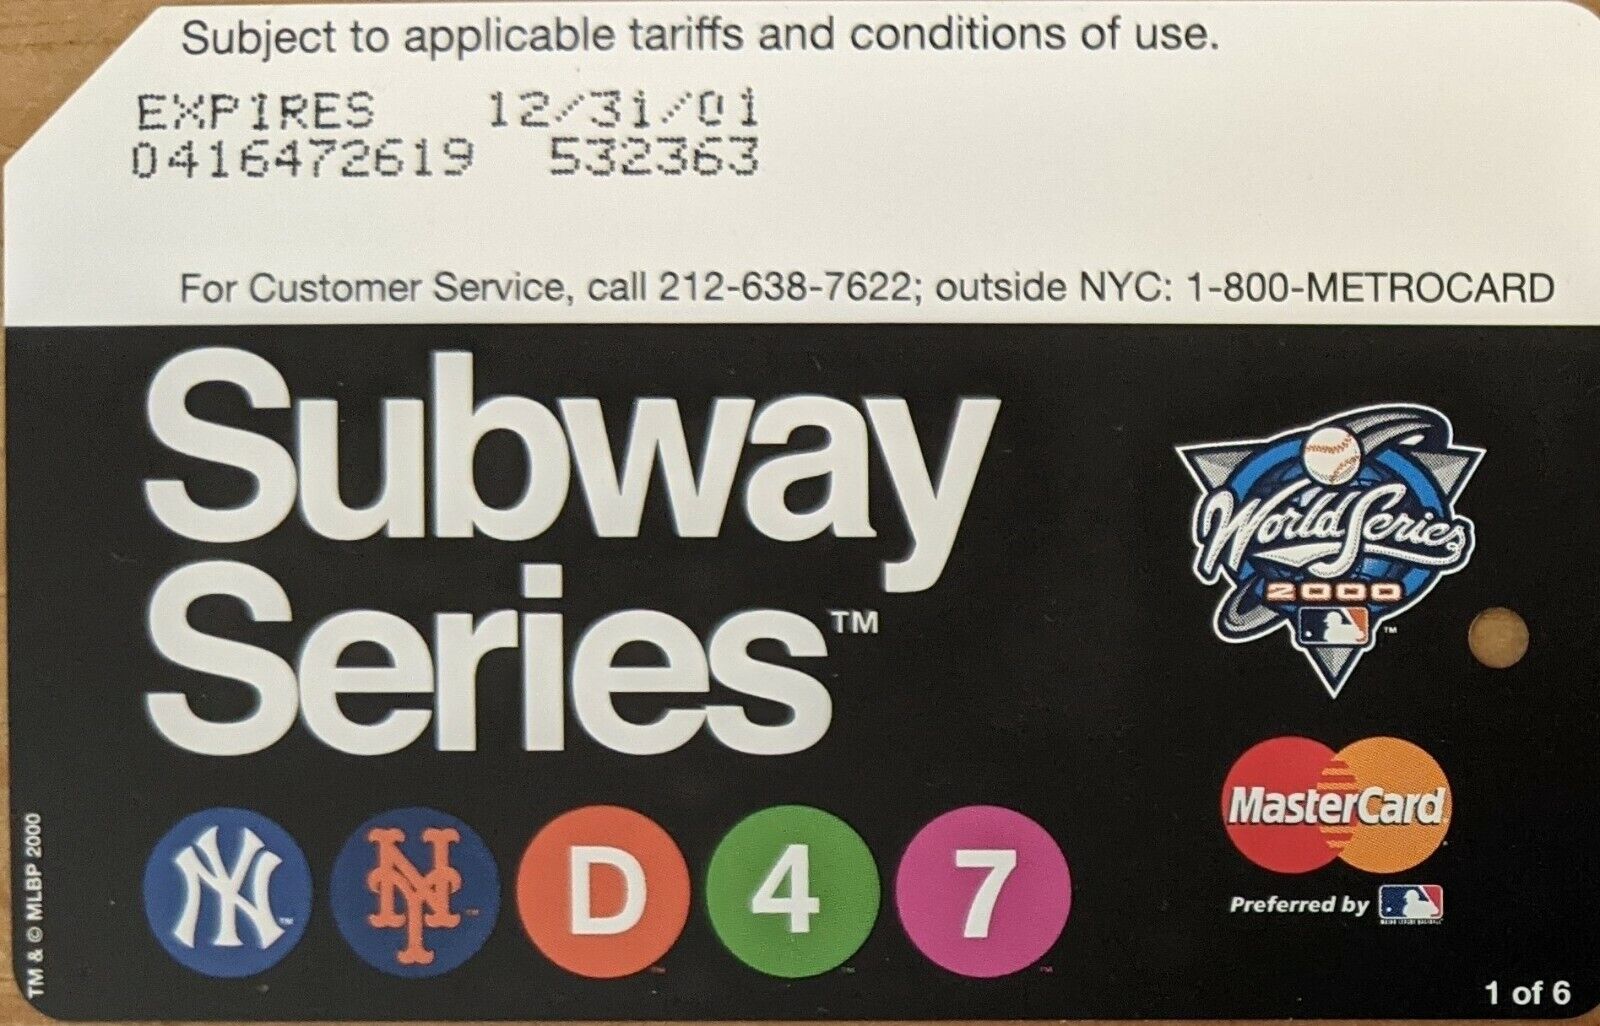 VERY RARE SUBWAY SERIES METROCARD- Mint Condition-Expired